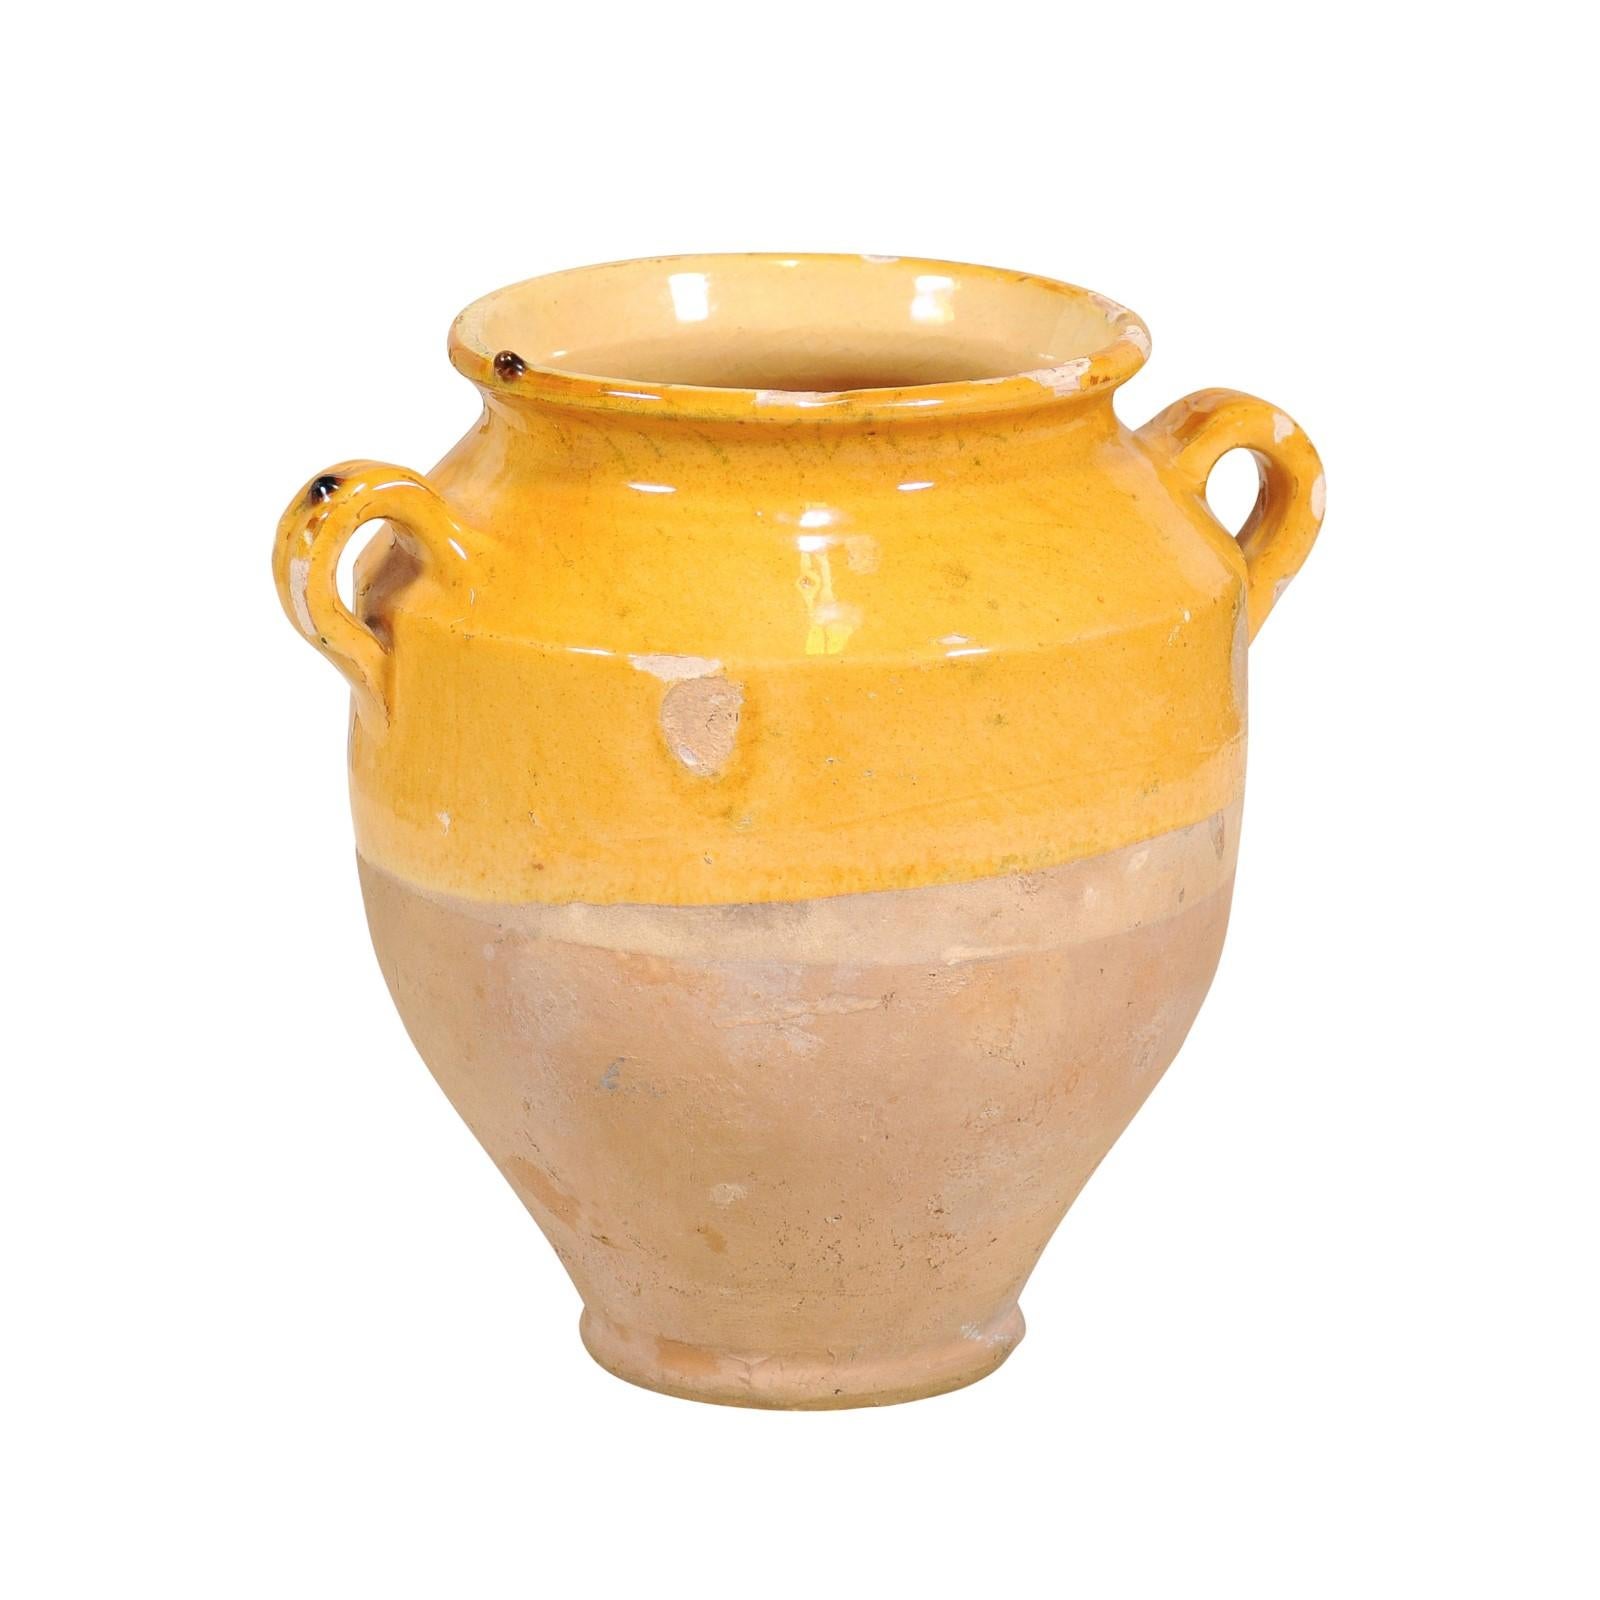 A French Provincial pot à confit pottery from the 20th century with yellow glaze, two lateral handles and rustic character. Step into the rustic charm of the French countryside with this 20th-century French Provincial pot à confit, a piece that